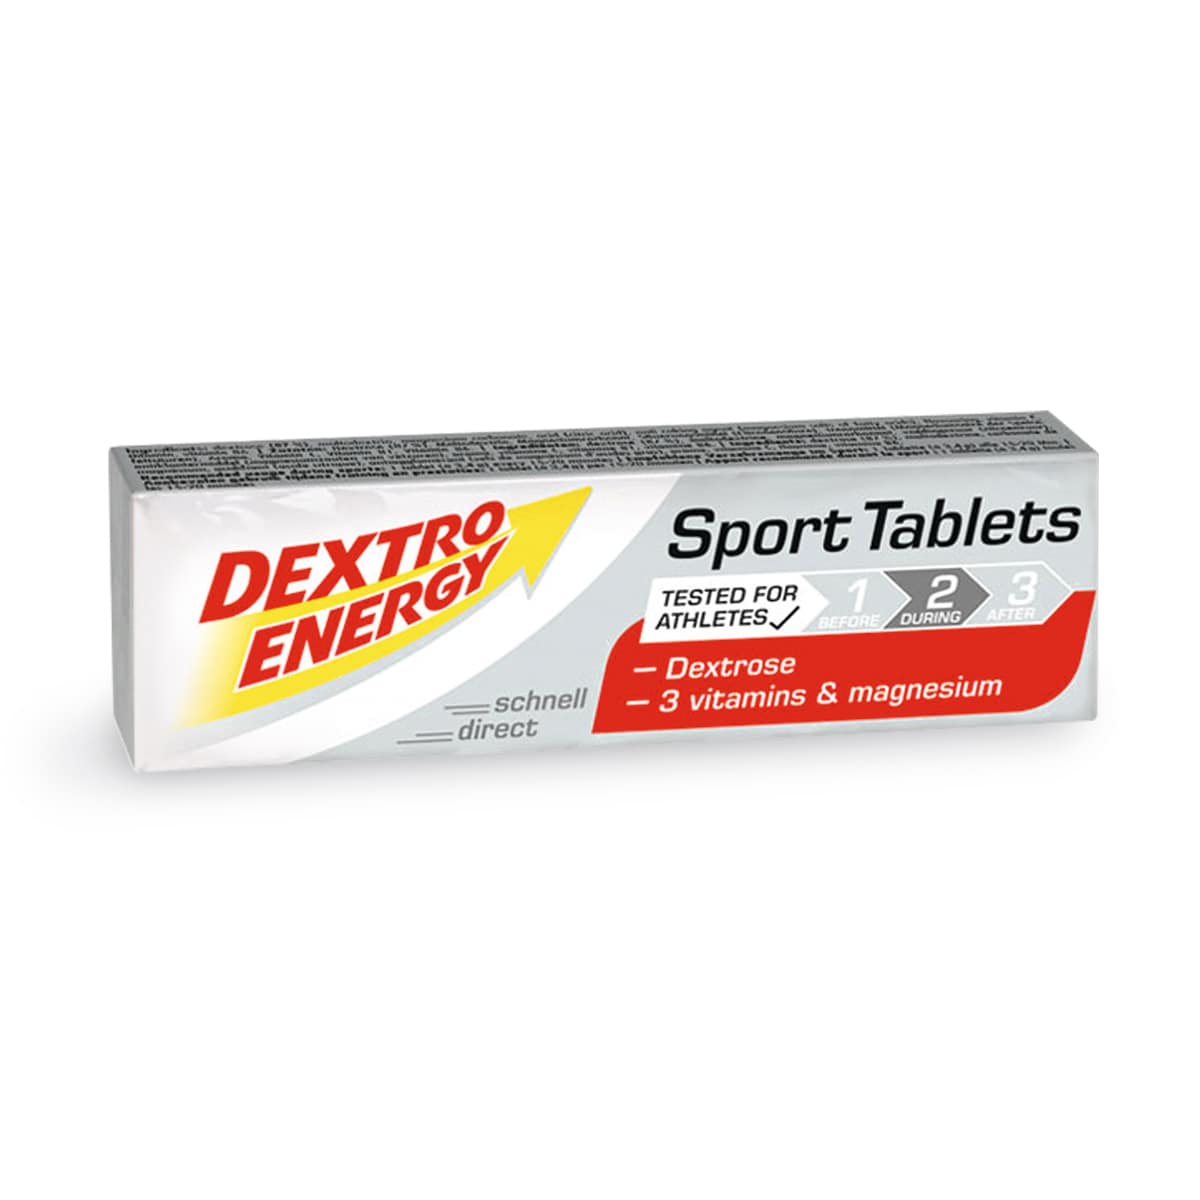 Sports Tablets 94g (2 x 47g) DUO